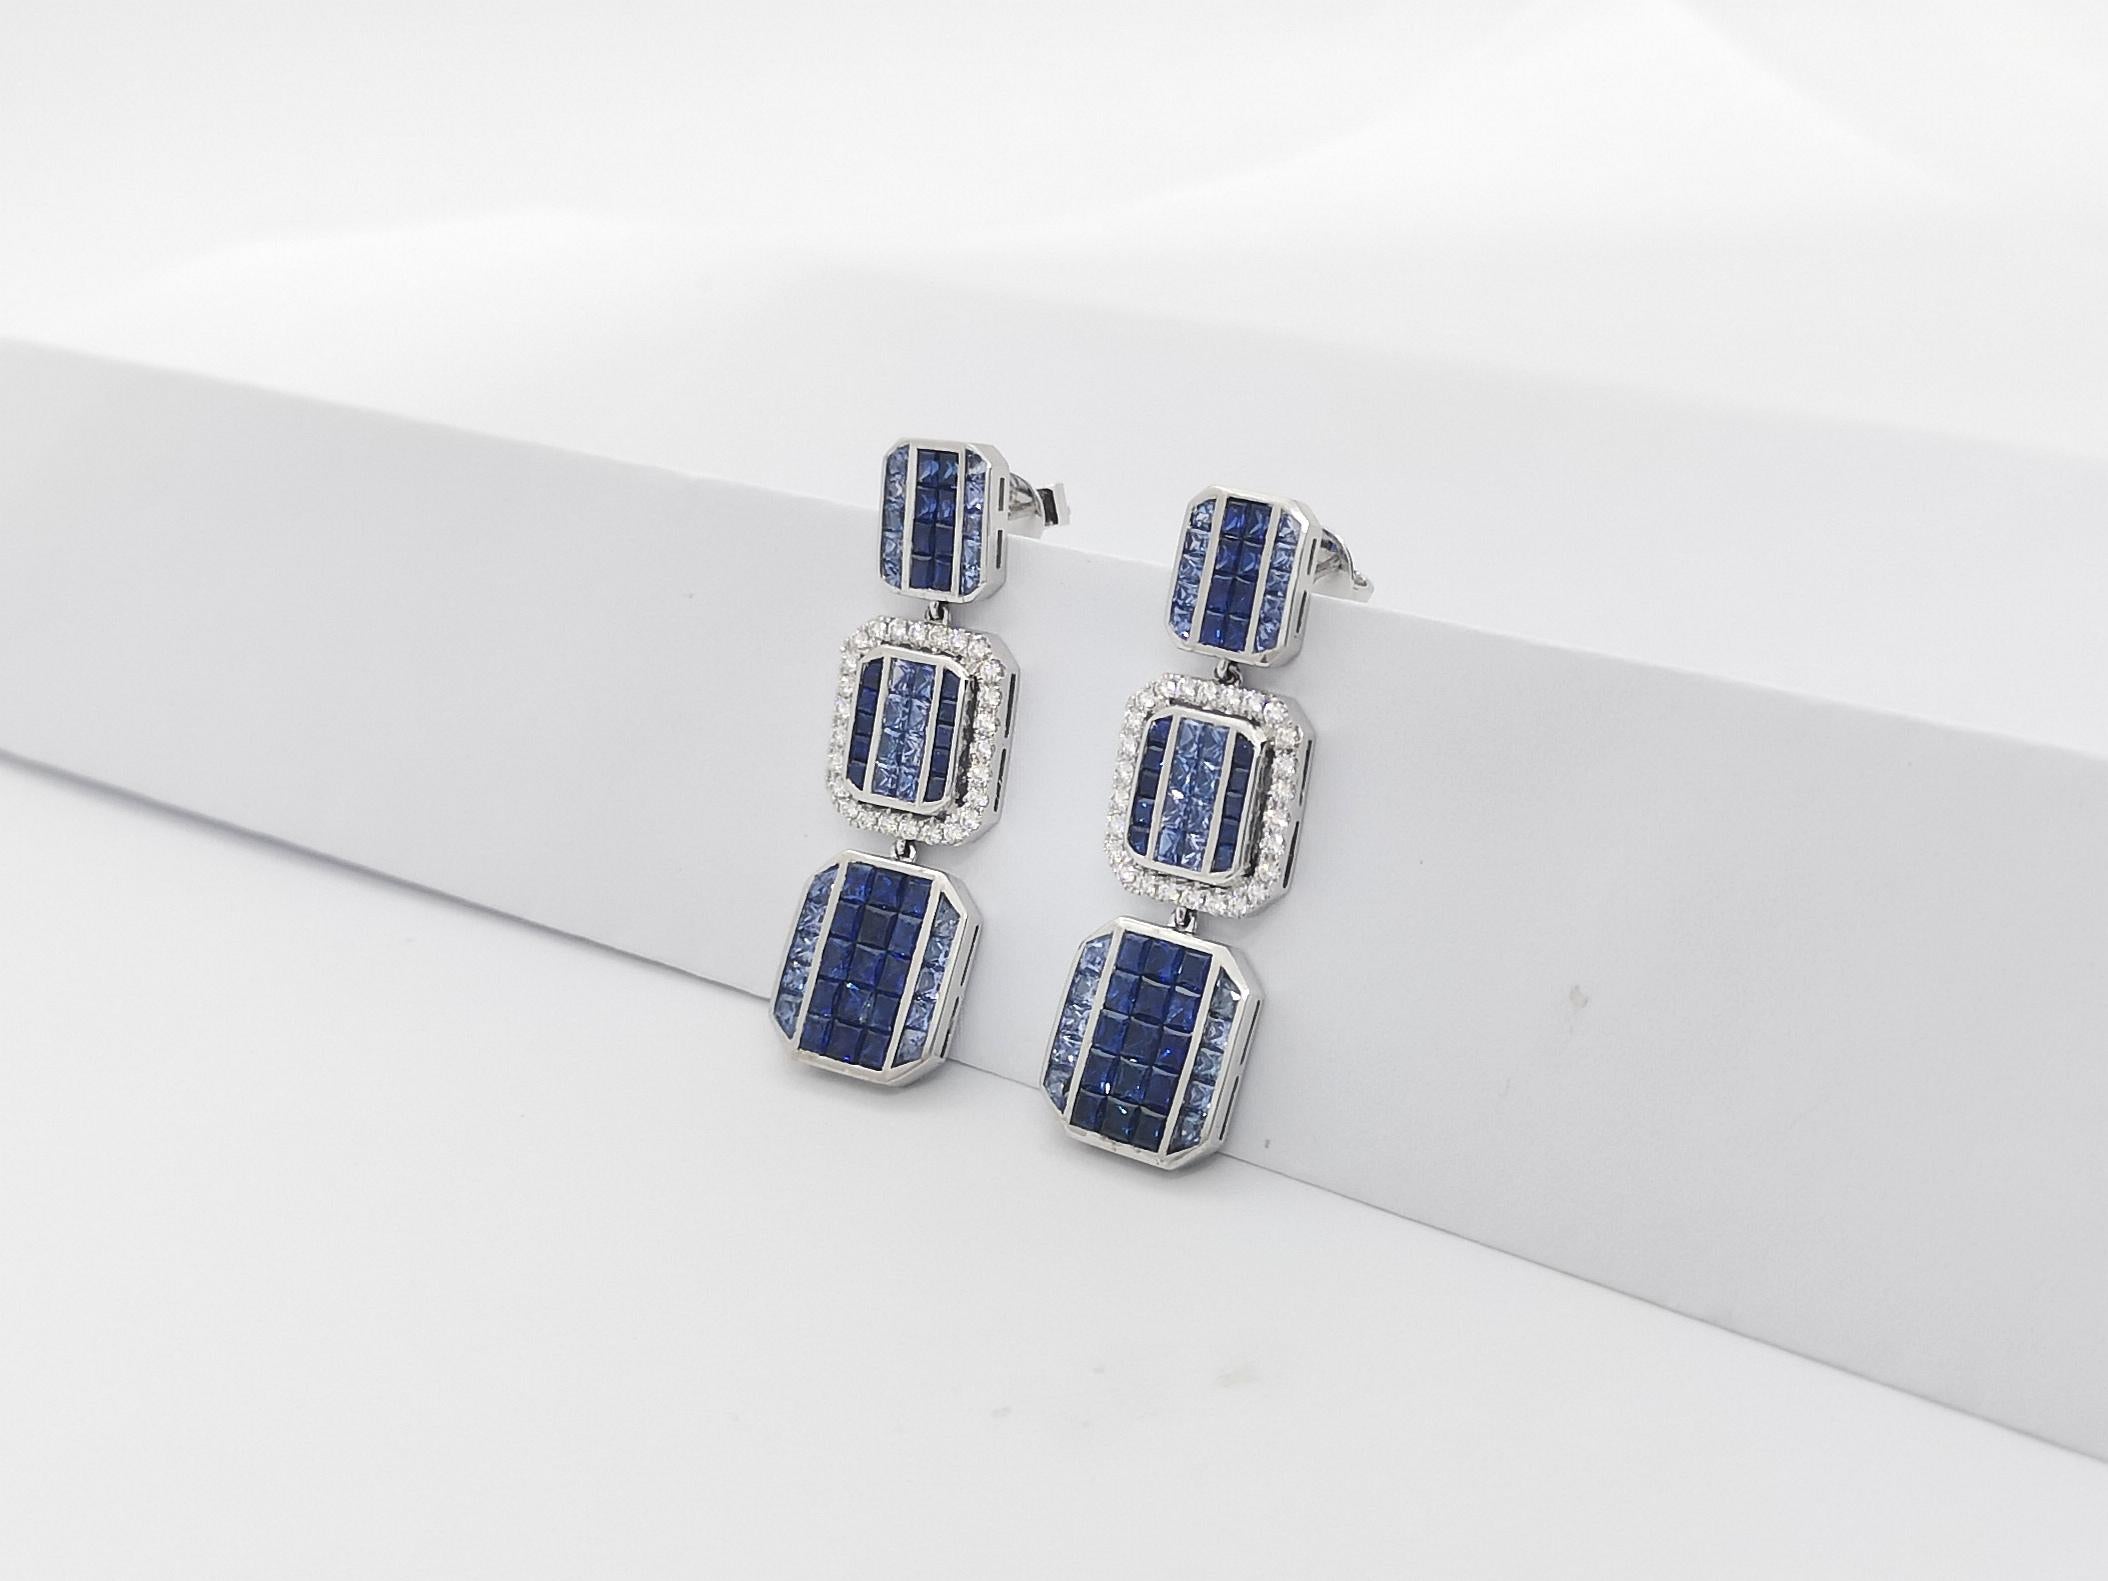 Blue Sapphire 5.42 carats and Diamond 0.52 carat Earrings 18K White Gold

Width: 1.3 cm
Length: 1.6 cm
Weight: 3.07 grams

A striking combination of perfectly cut princess-cut and baguette-cut diamonds, this pair promises versatility and